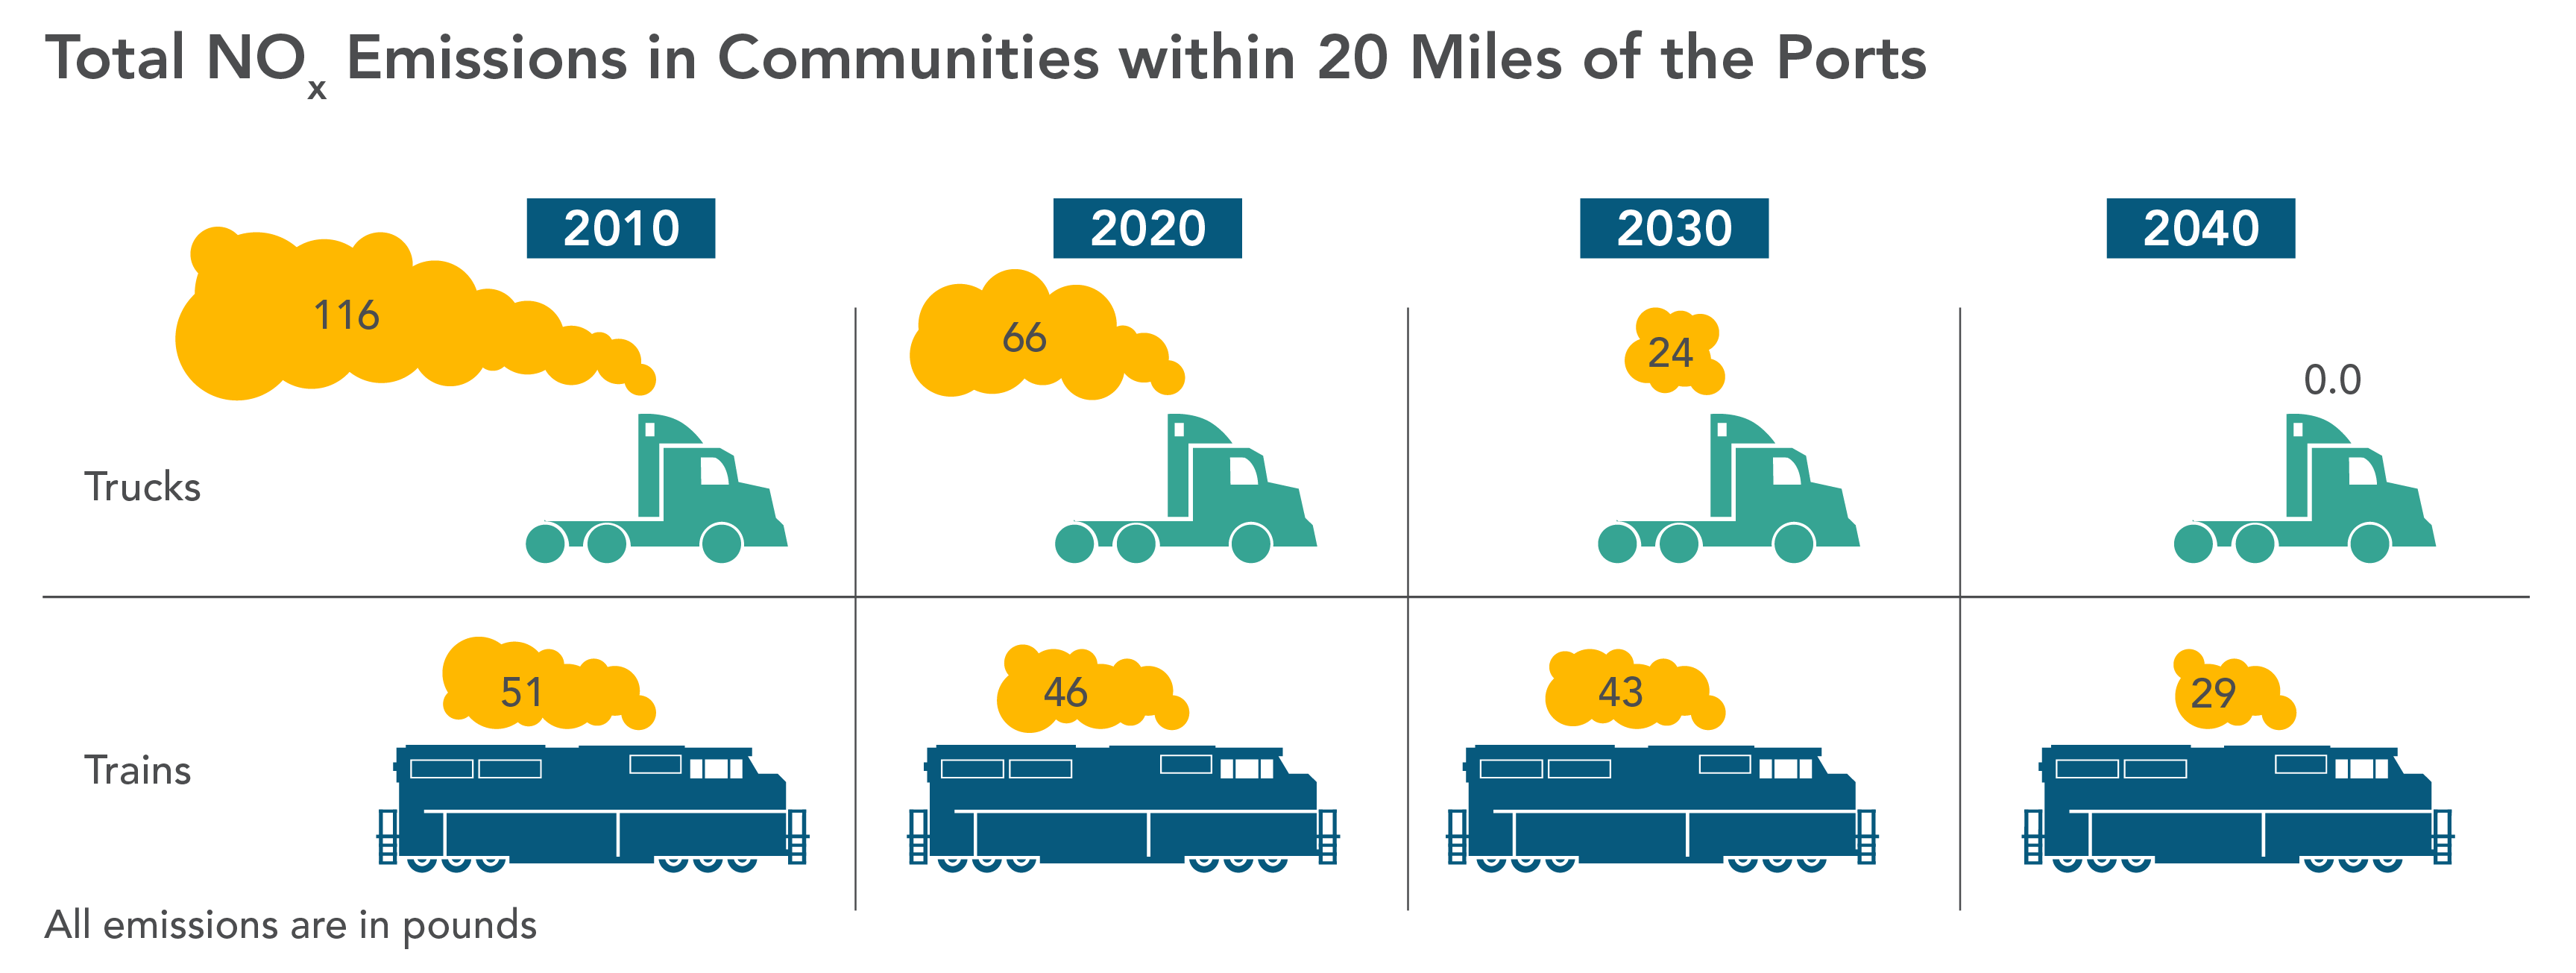 Comparison of truck and train Nox emissions in communities within 20 miles of the ports.  Trucks emit less Nox than trains by 2030.